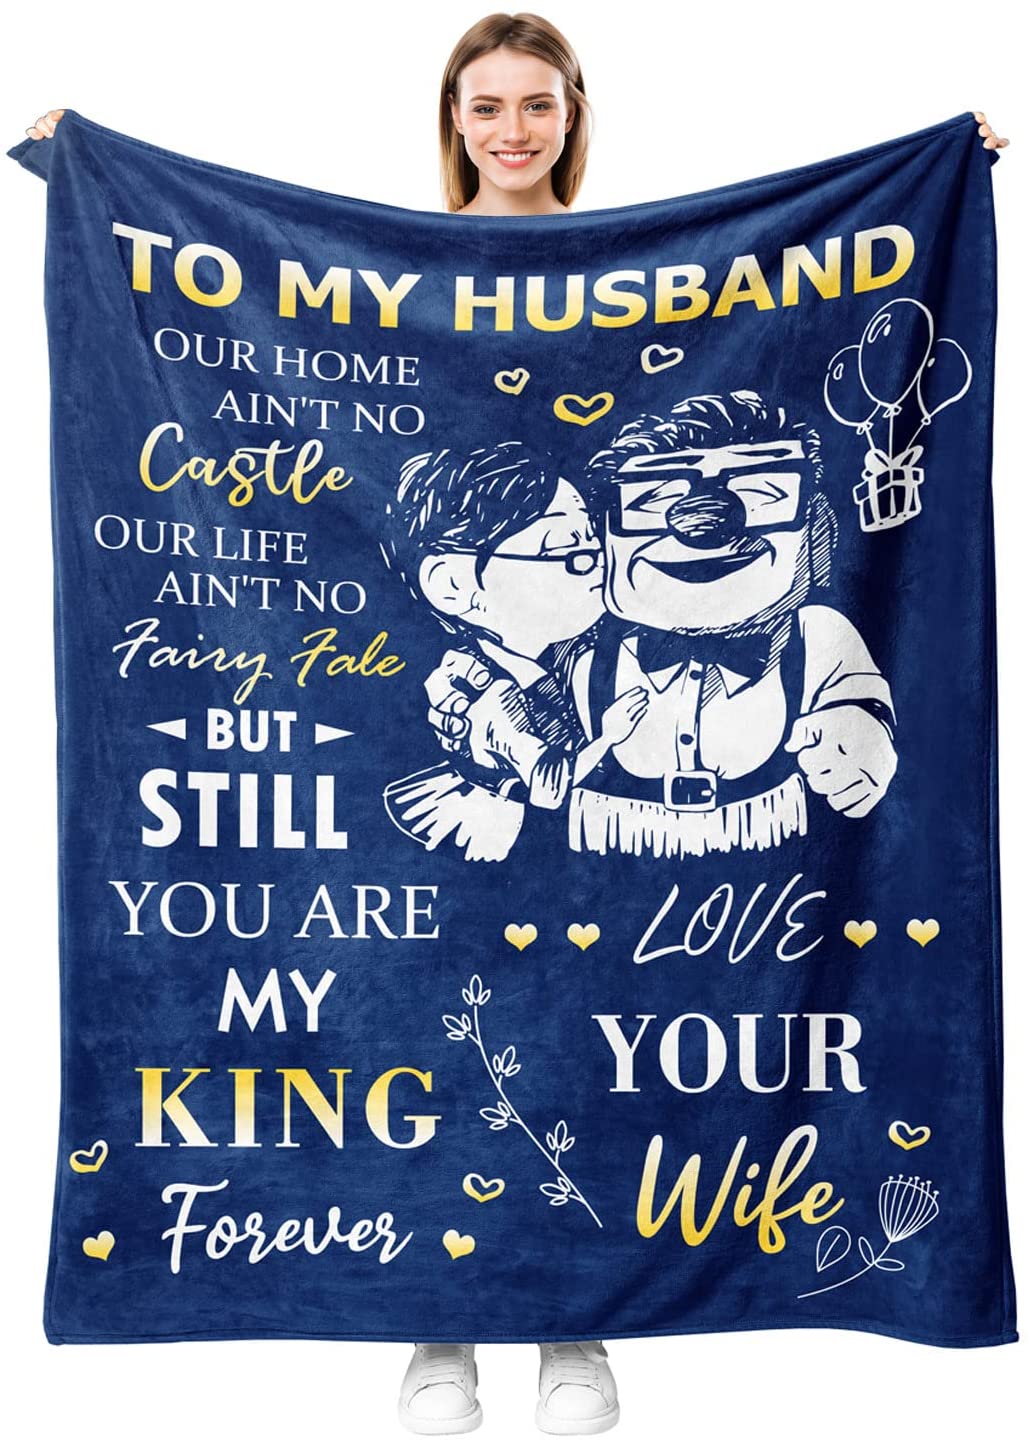 Gifts For Husband Blanket - You Are My King Forever, To My Husband Blanket - Gift From Wife, Anniversary, Wedding, Valentines, Mother's Day, Christmas, Birthday Ultra-Soft Micro Fleece Throws Blanket For Couch Sofa And Travel